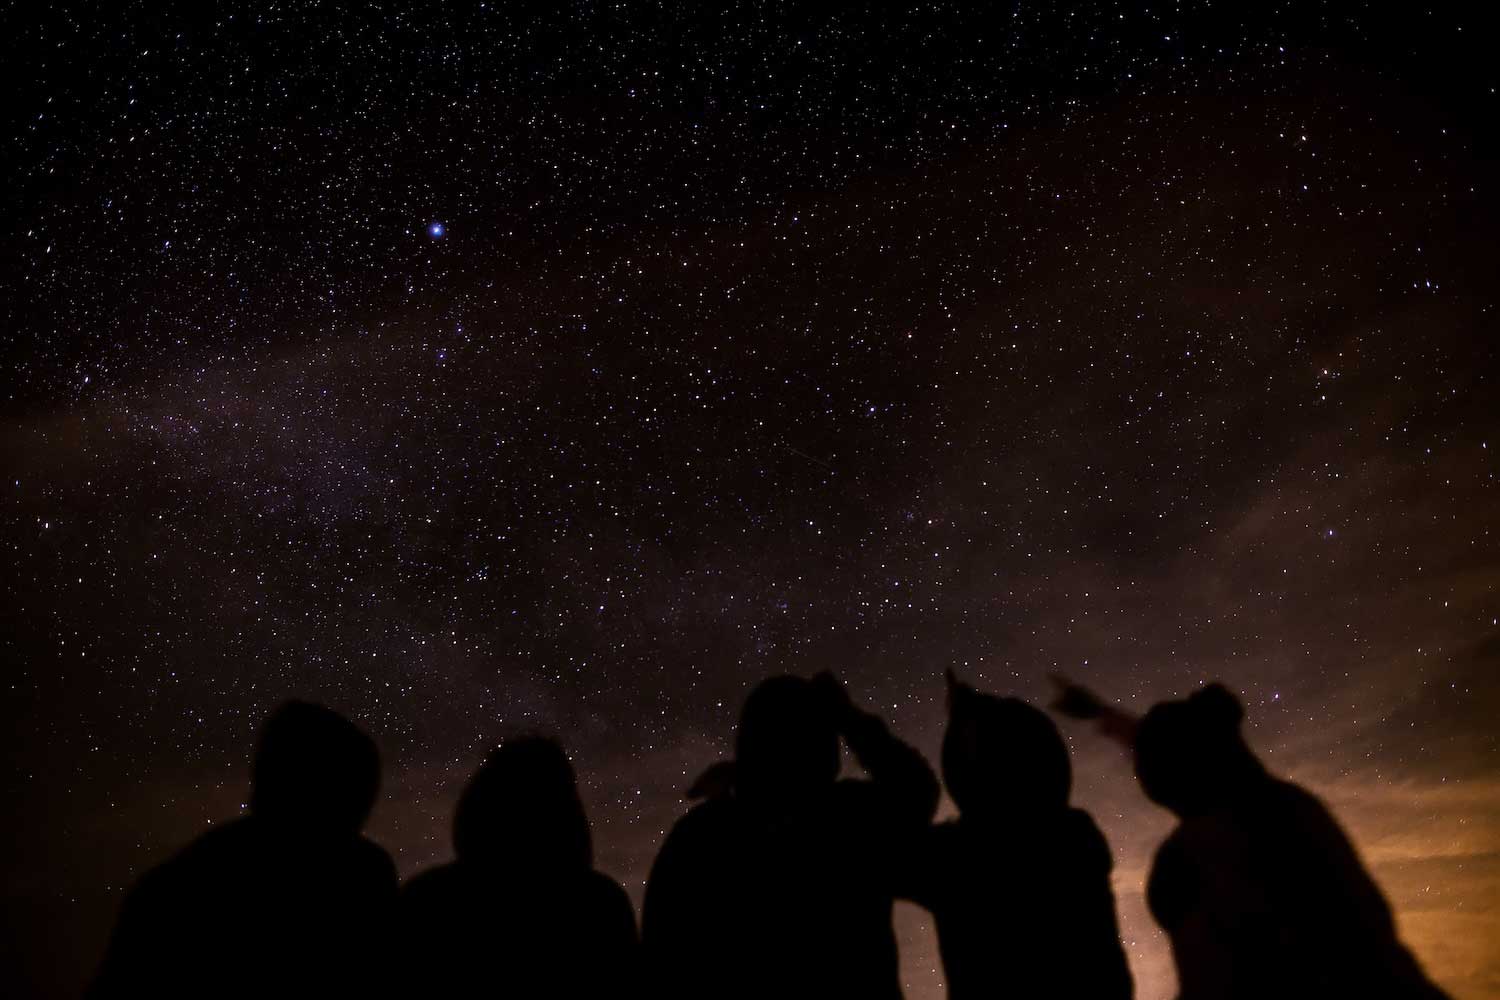 A group of five people looking up and pointing at the starry night sky.